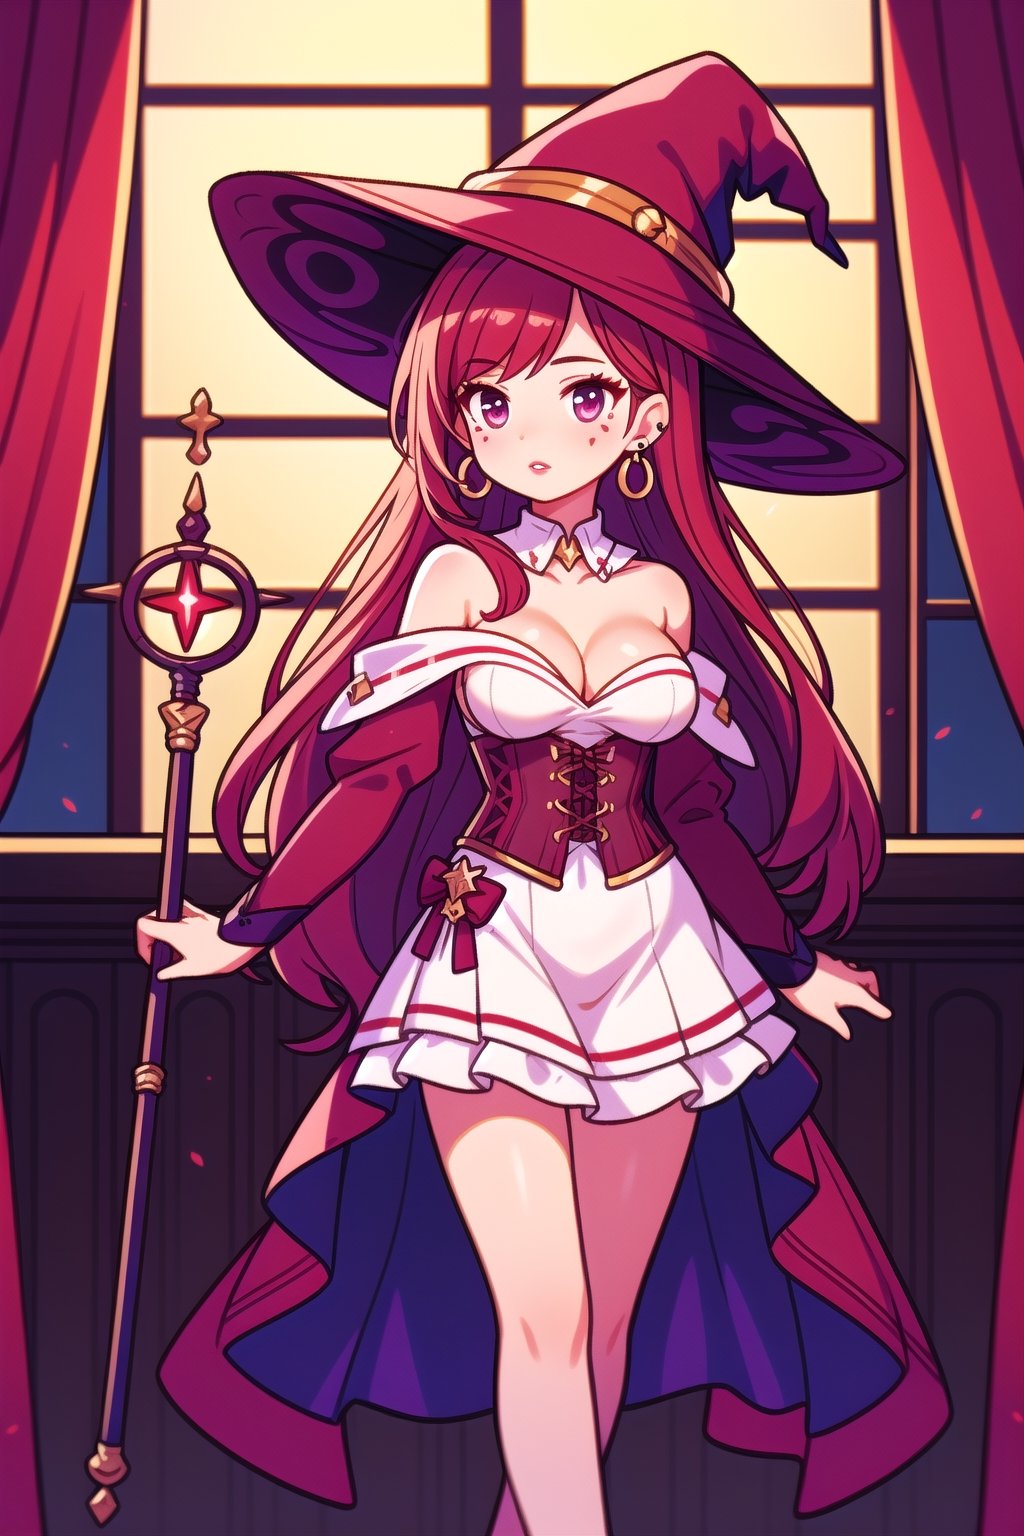 Mature female, long ginger hair, extremely long hair, beauty mark, burgundy eyes, earrings, medium breasts, boob window, exposed shoulders, burgundy lips, long legs

Burgundy Witches hat, white feather on hat, long white dress, burgundy top, burgundy corset, white collar, gold arm brazers, magic staff